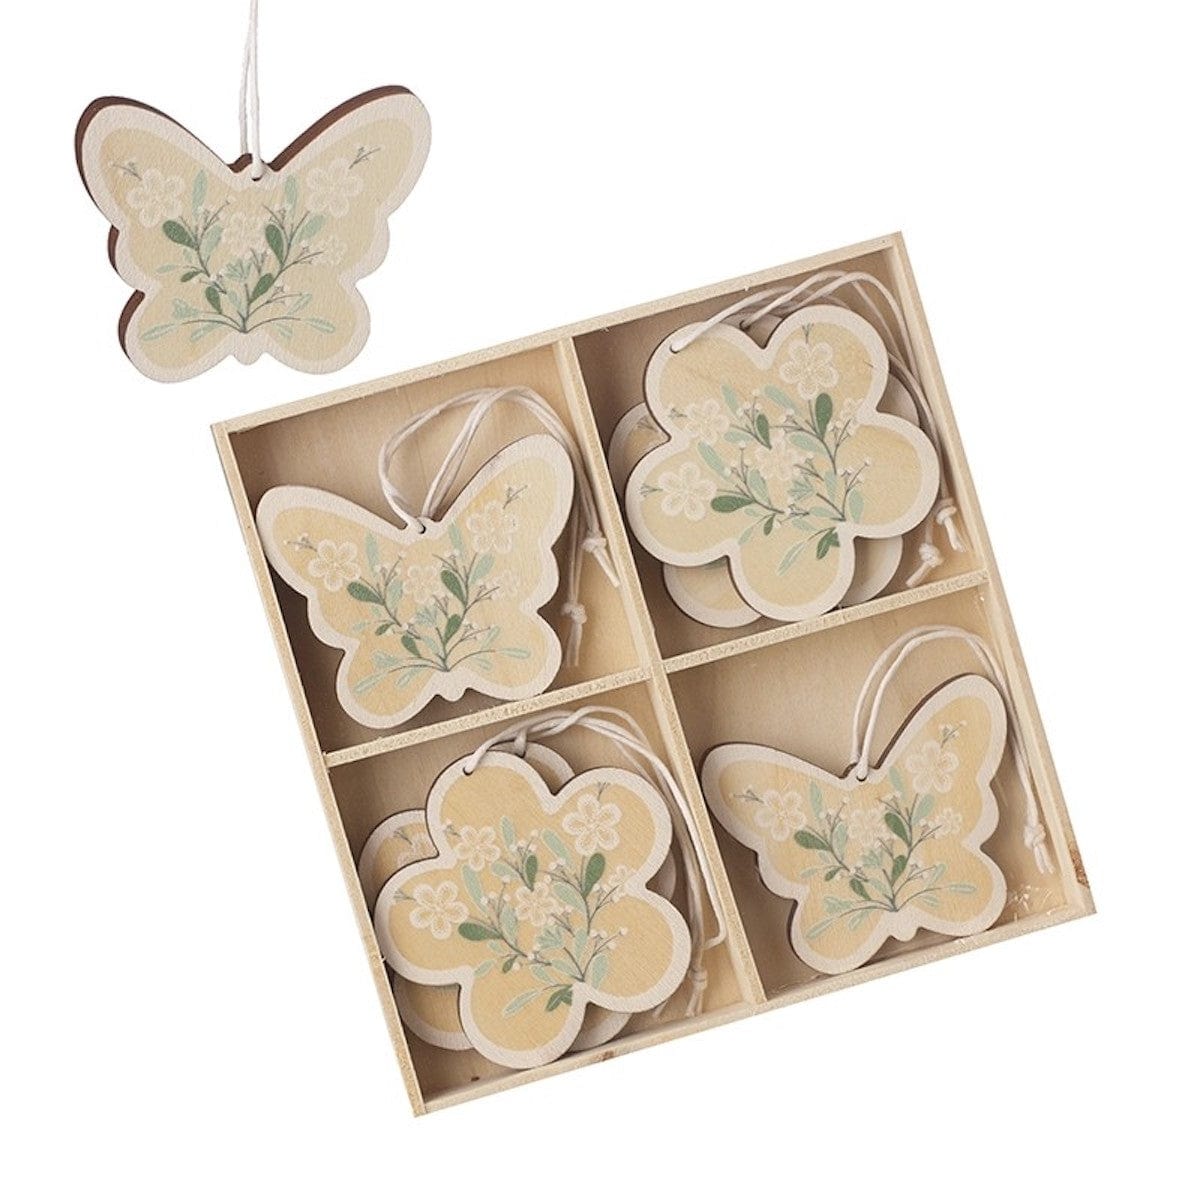 Heaven Sends easter wreath Set of 8 Floral Butterfly Wooden Easter Decorations